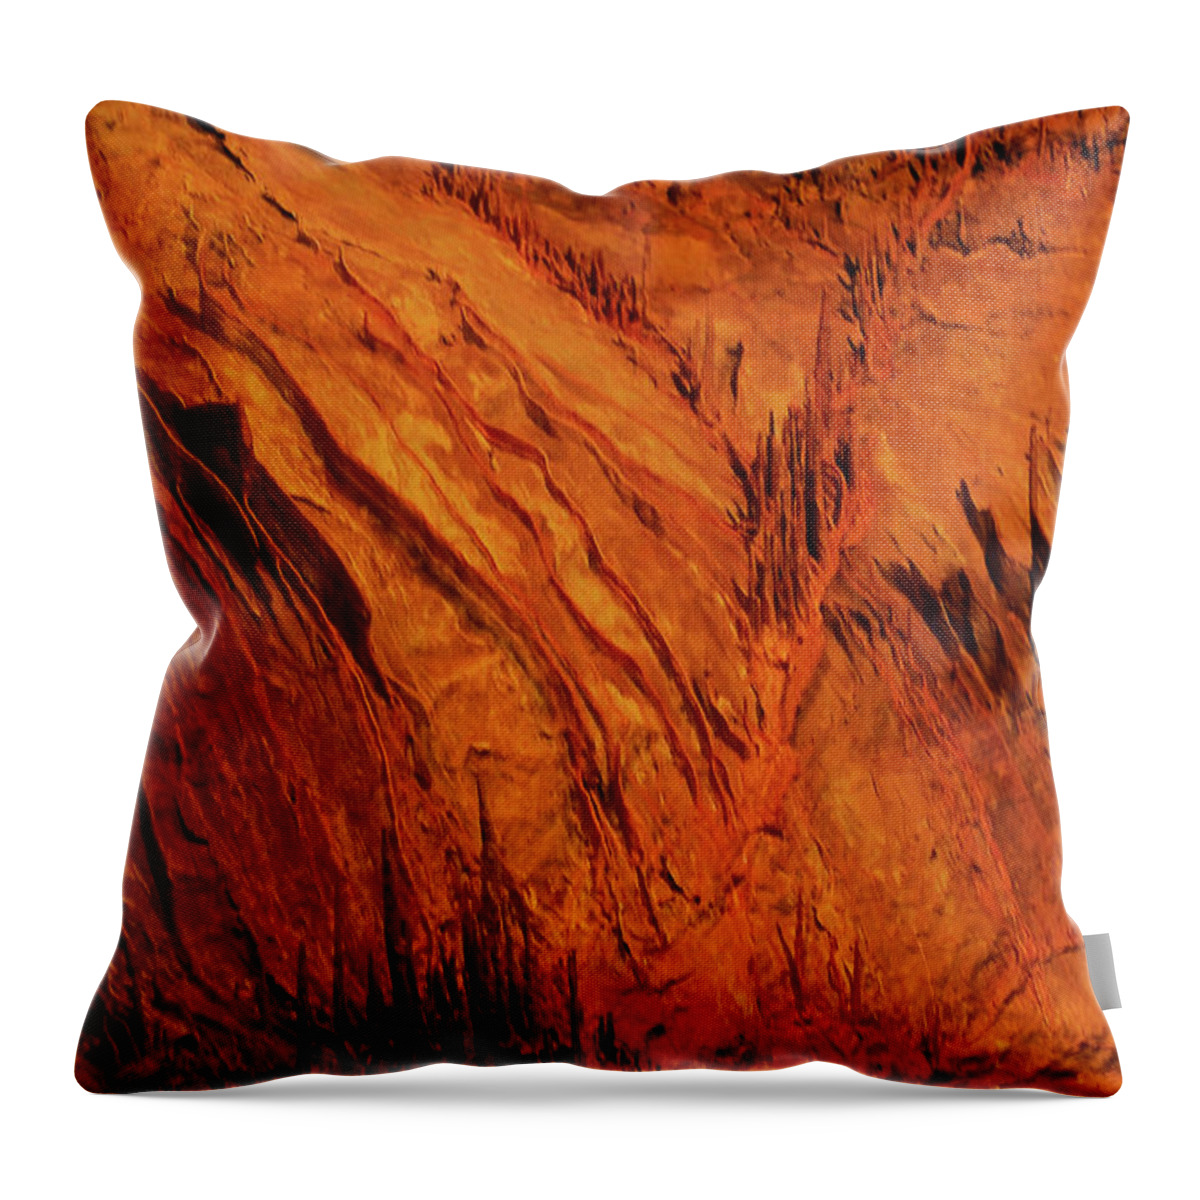 Surreal Throw Pillow featuring the photograph Alien Landscapes by Joseph Noonan